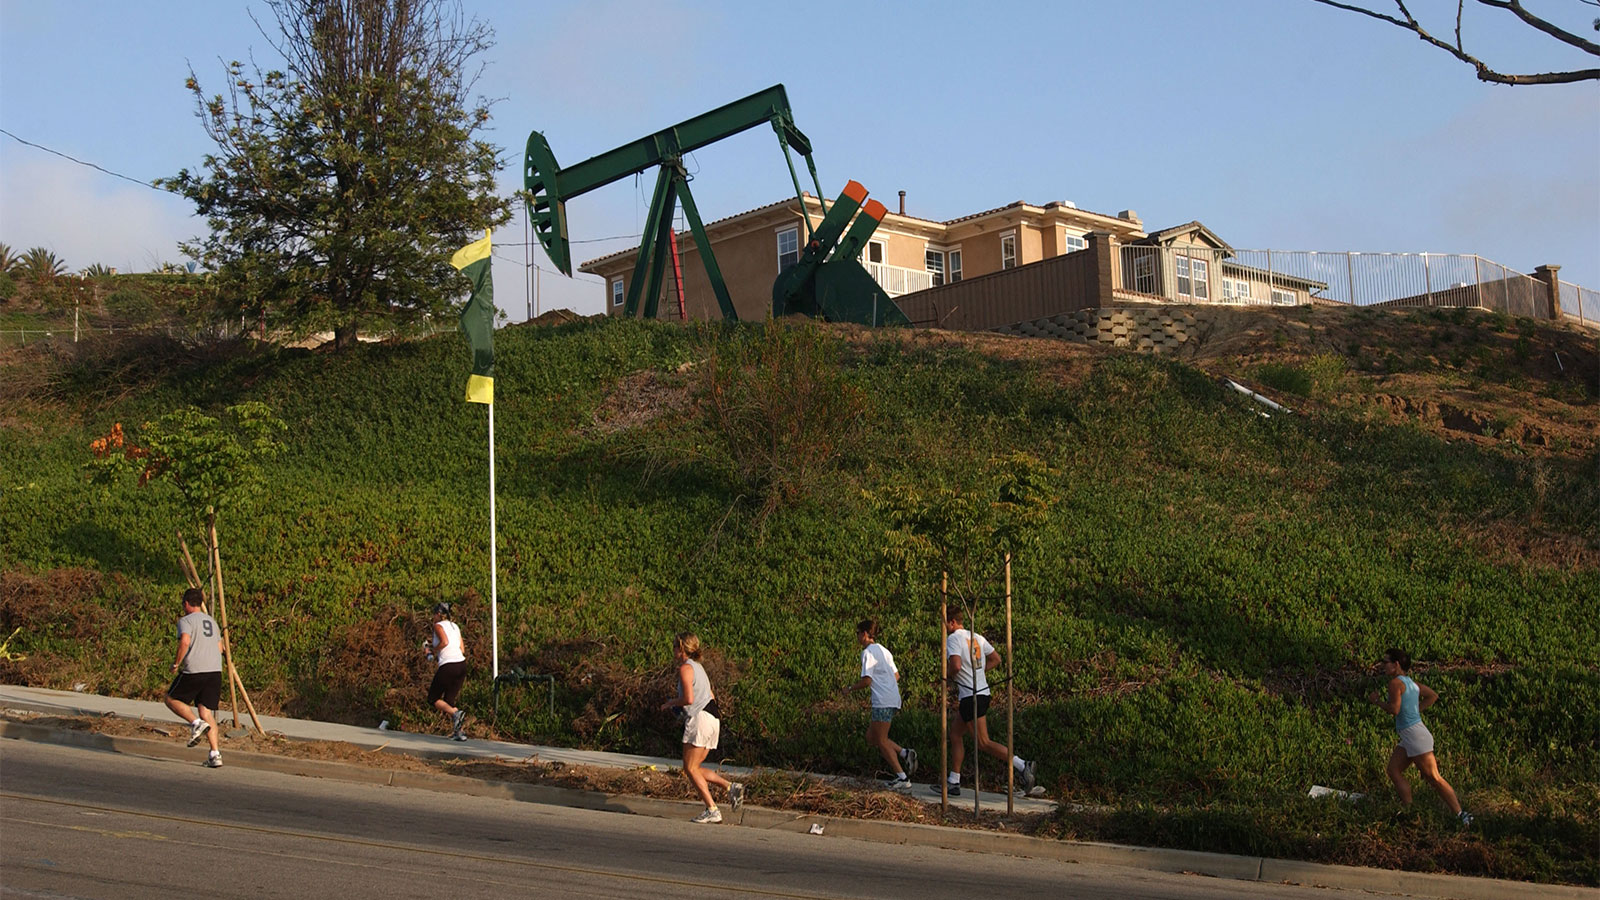 A group of joggers passes an oil well pumping next to residential units under construction in residential California